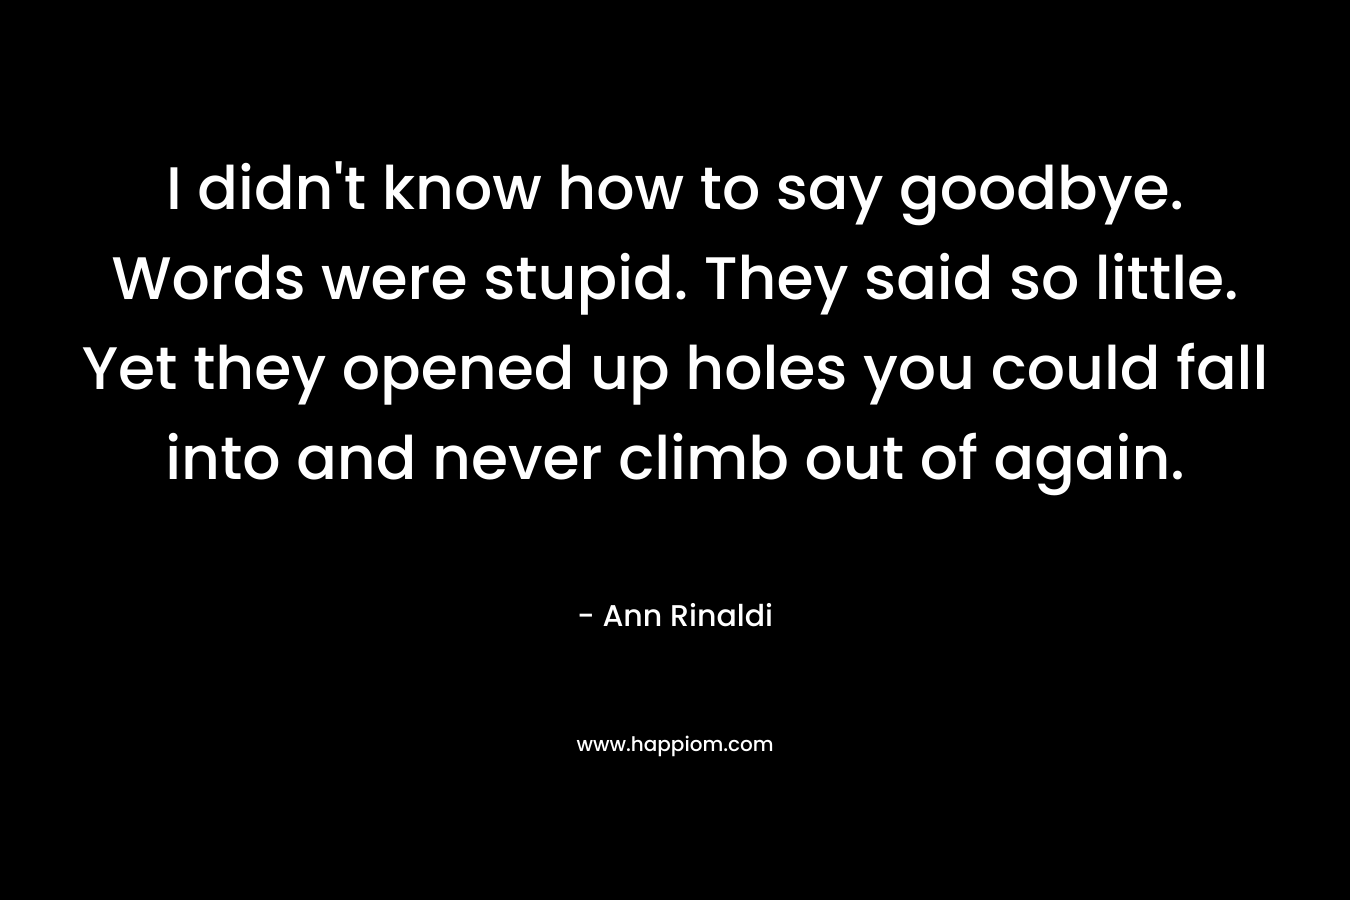 I didn’t know how to say goodbye. Words were stupid. They said so little. Yet they opened up holes you could fall into and never climb out of again. – Ann Rinaldi